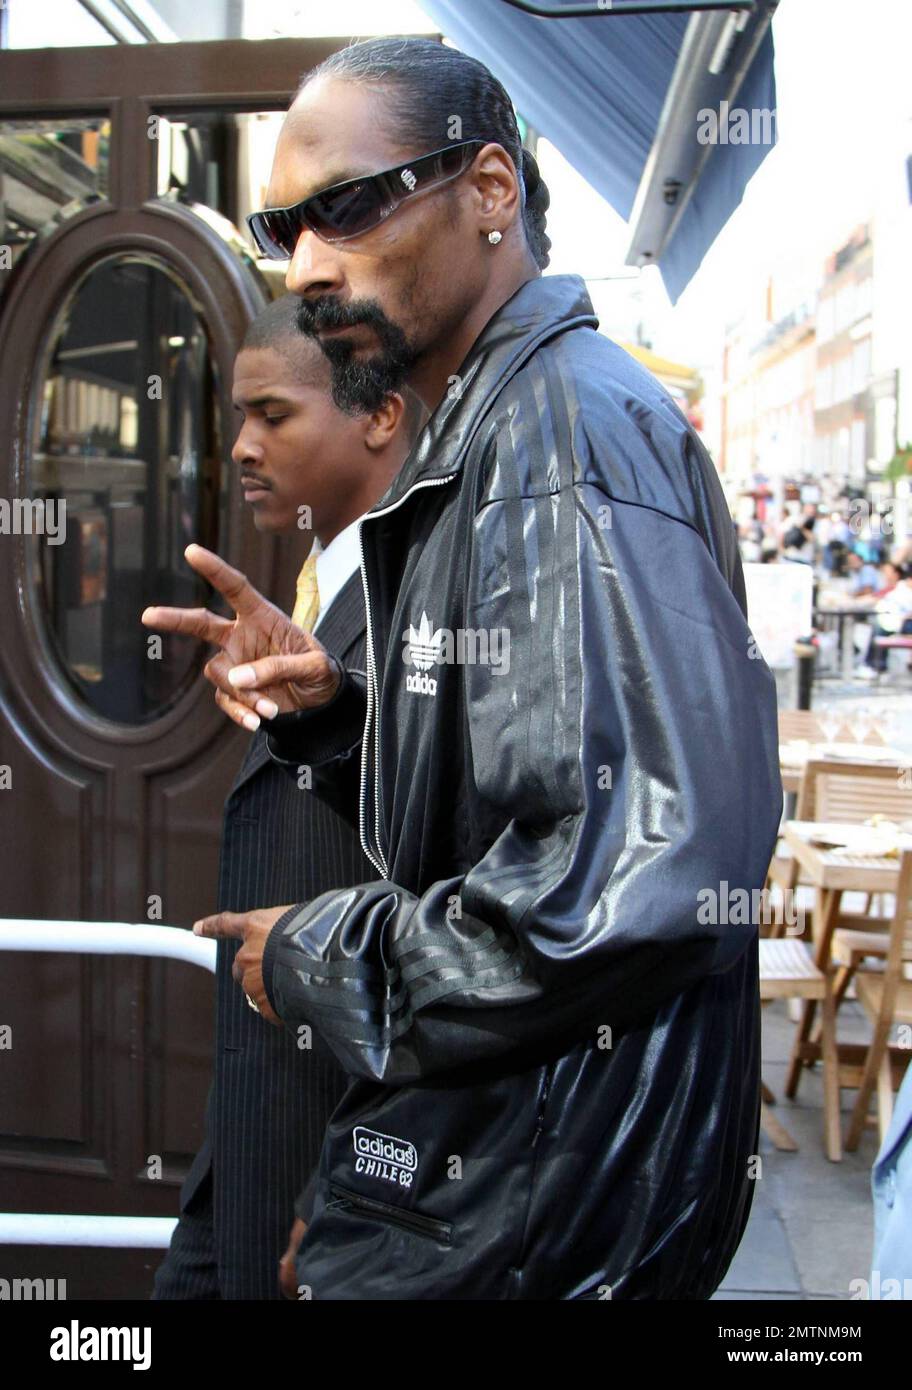 Wearing a black Addidas track suit, Dogg arrives a Footlocker location for a promotion. It's reported that Snoop, an established soap fan, told fans in Manchester, England, earlier